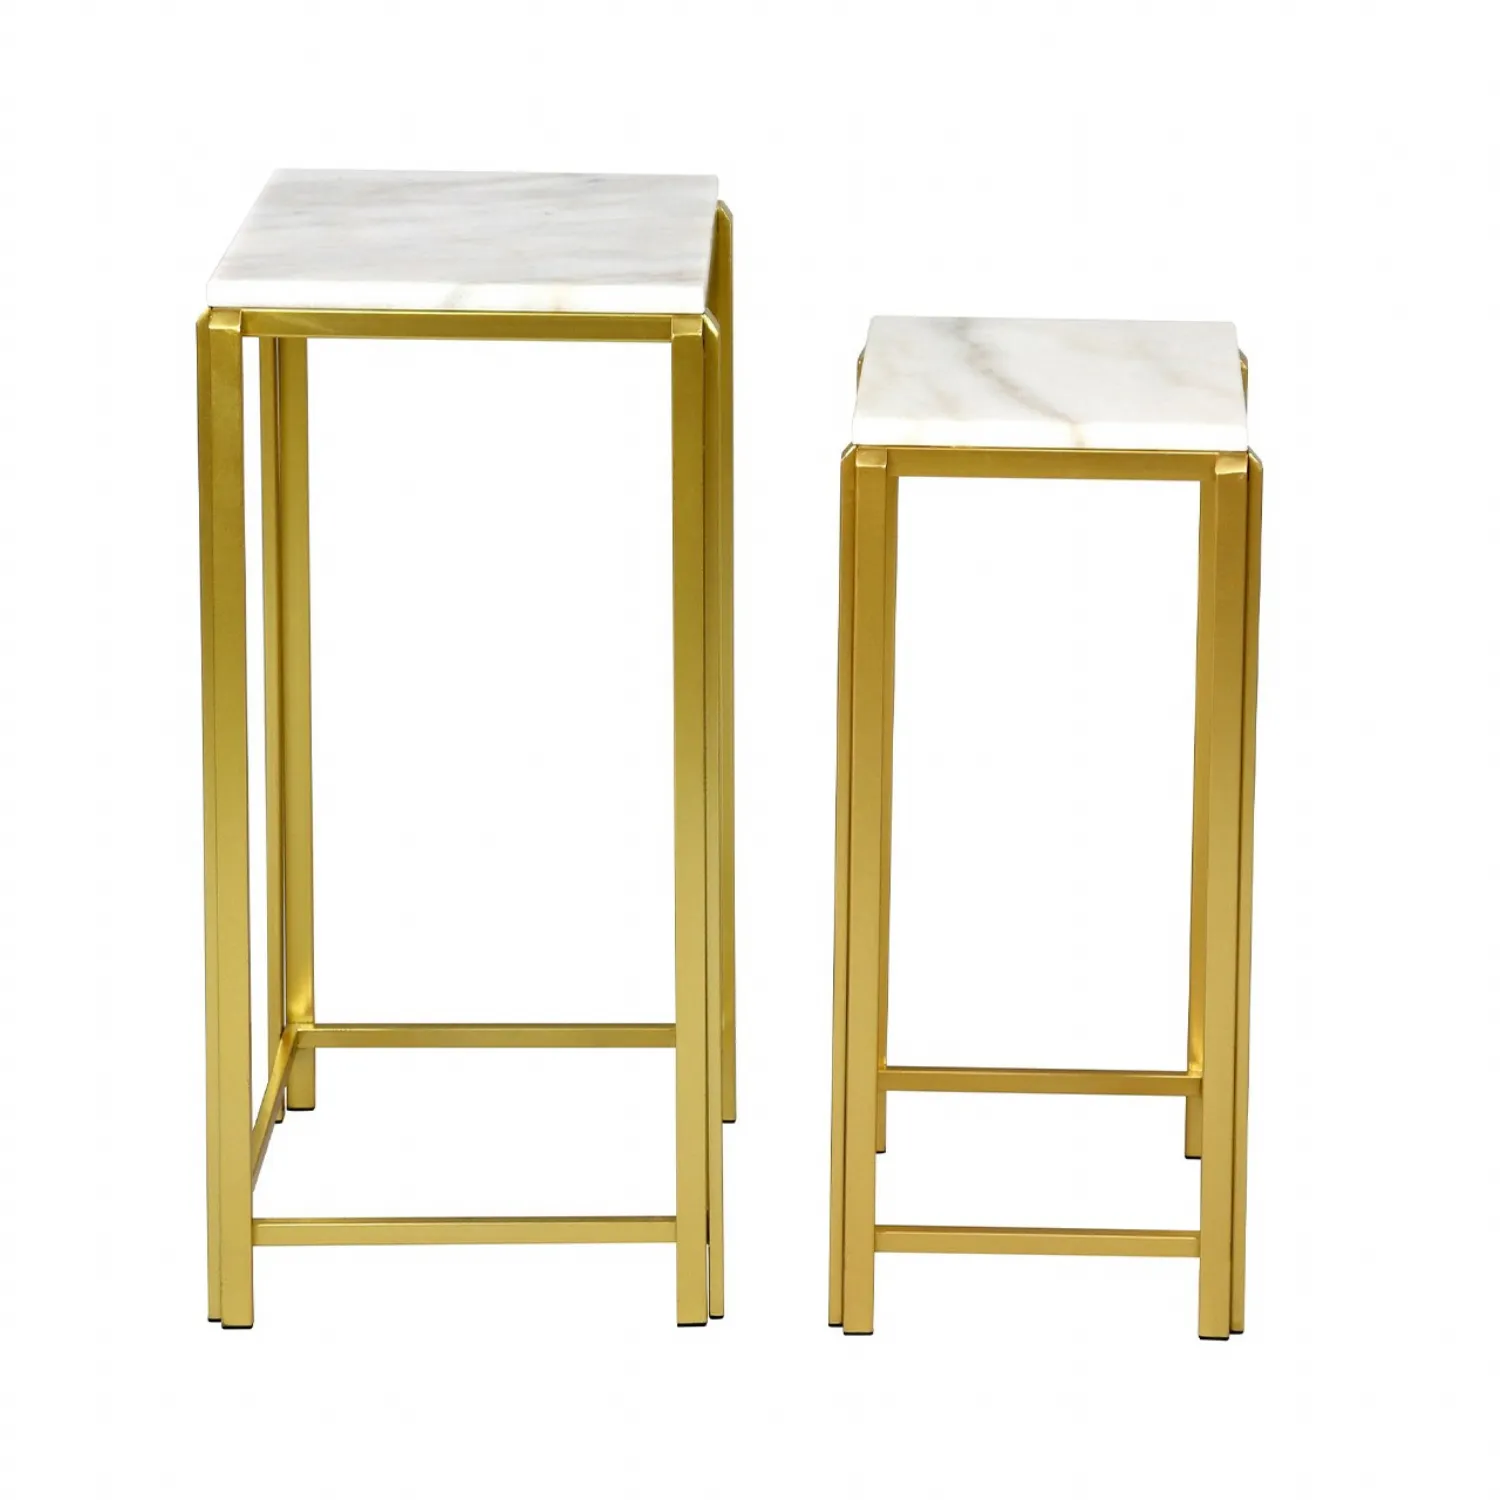 Lena Set Of 2 White Marble With Gold Metal Legs End Table